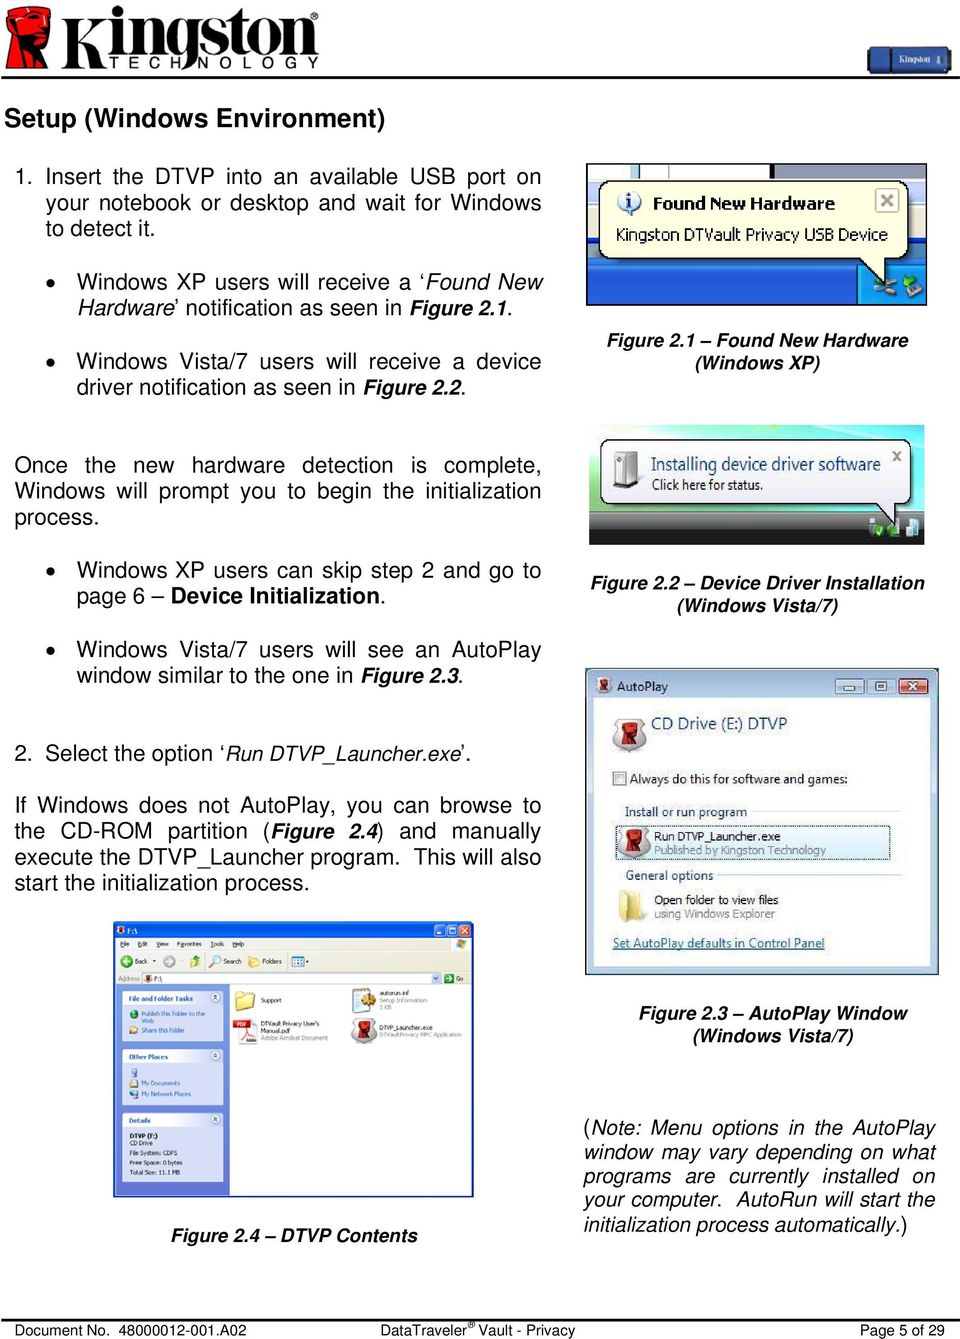 1. Windows Vista/7 users will receive a device driver notification as seen in Figure 2.